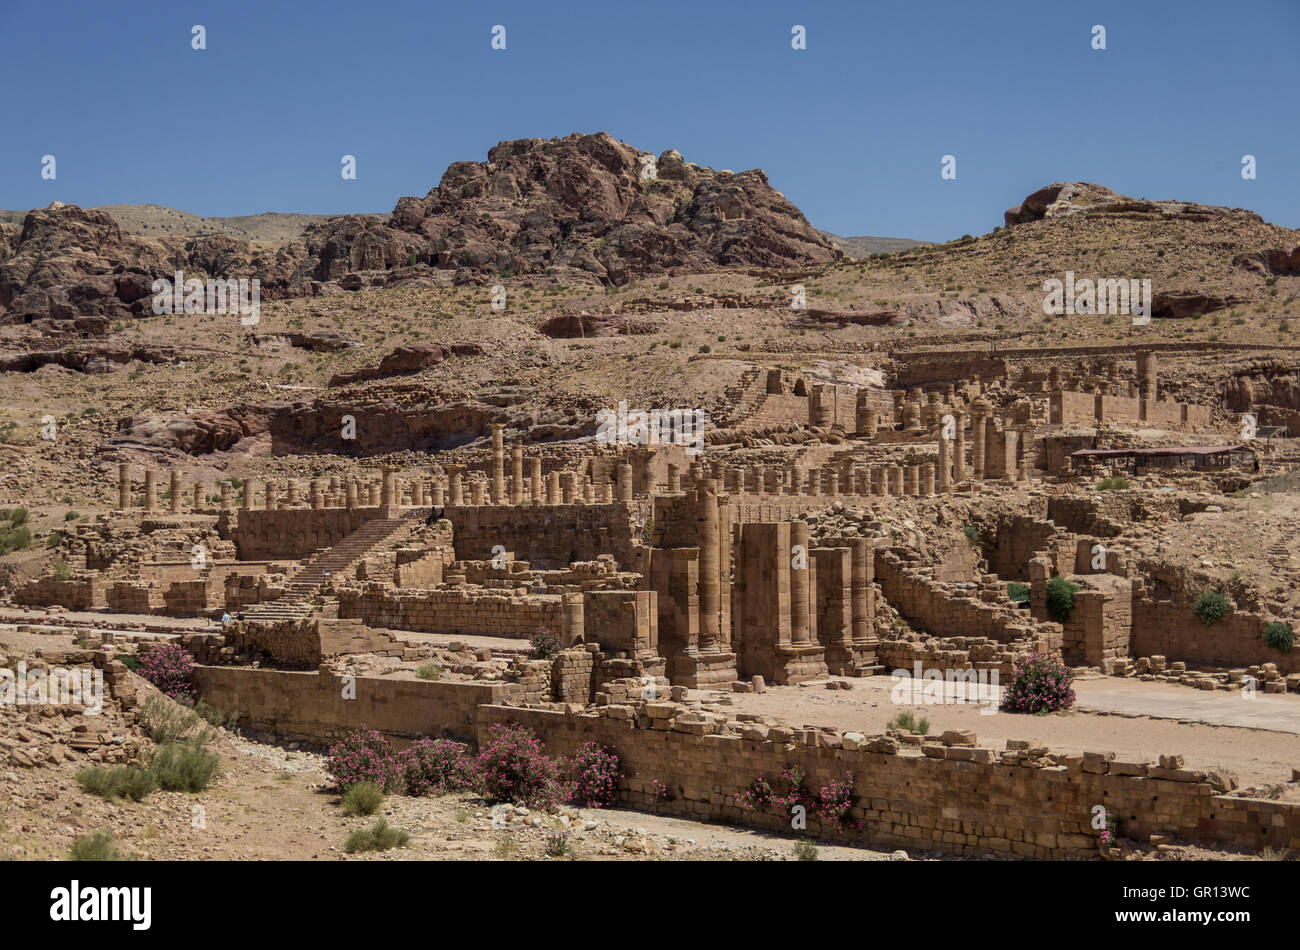 View of The Great Temple and Arched Gate in ancient city Petra, Jordan Stock Photo